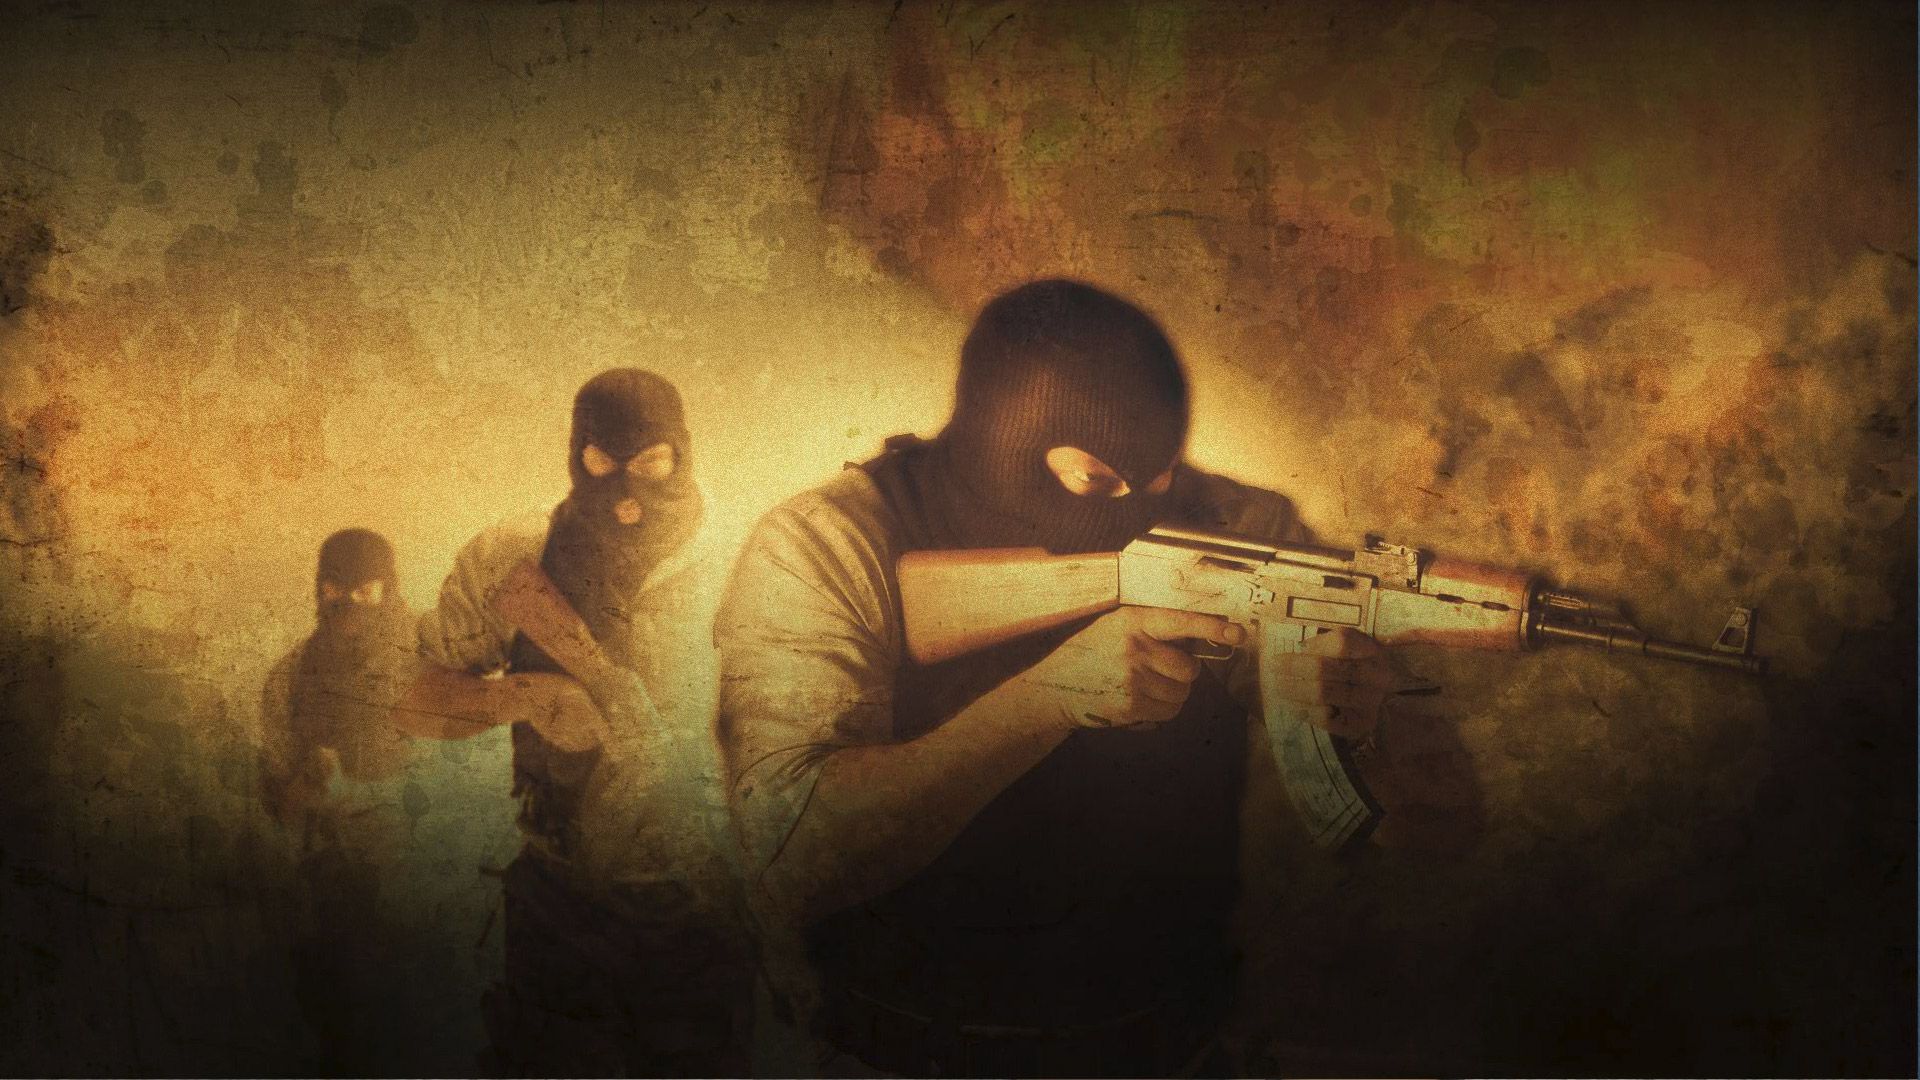 cs go wallpaper,soldier,movie,photography,shooting,action film